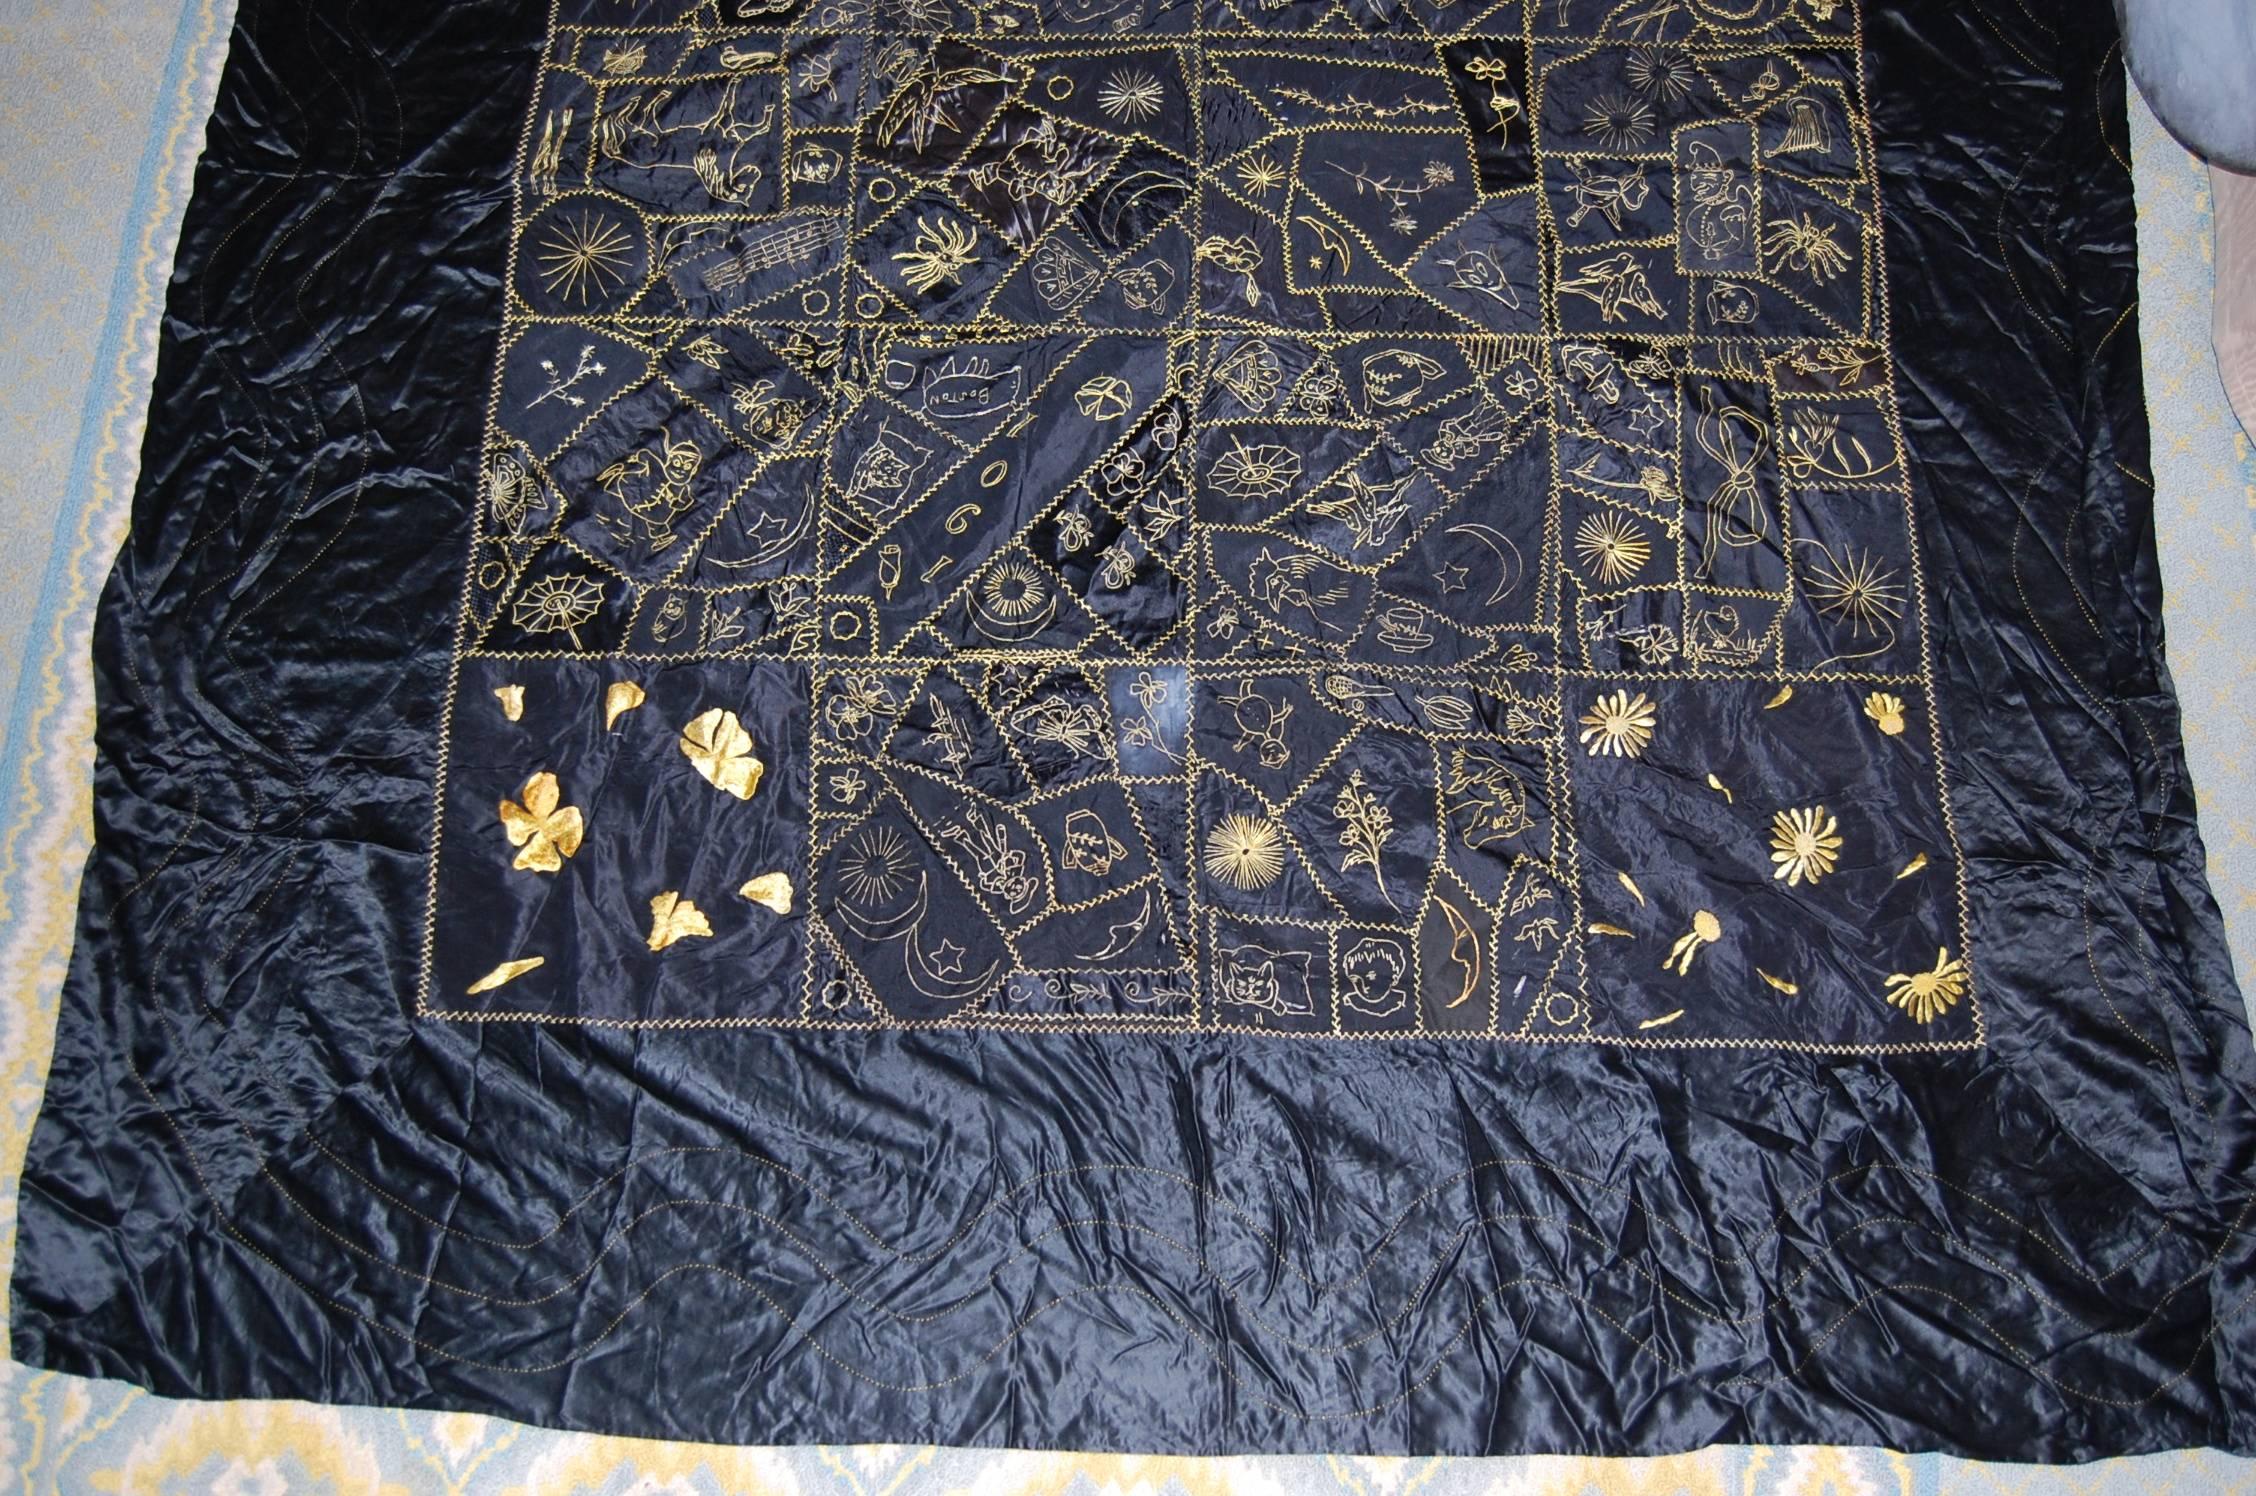 Arts and Crafts New England Silk Quilt with Gold Embroidery in Excellent Condition, 1901, Boston